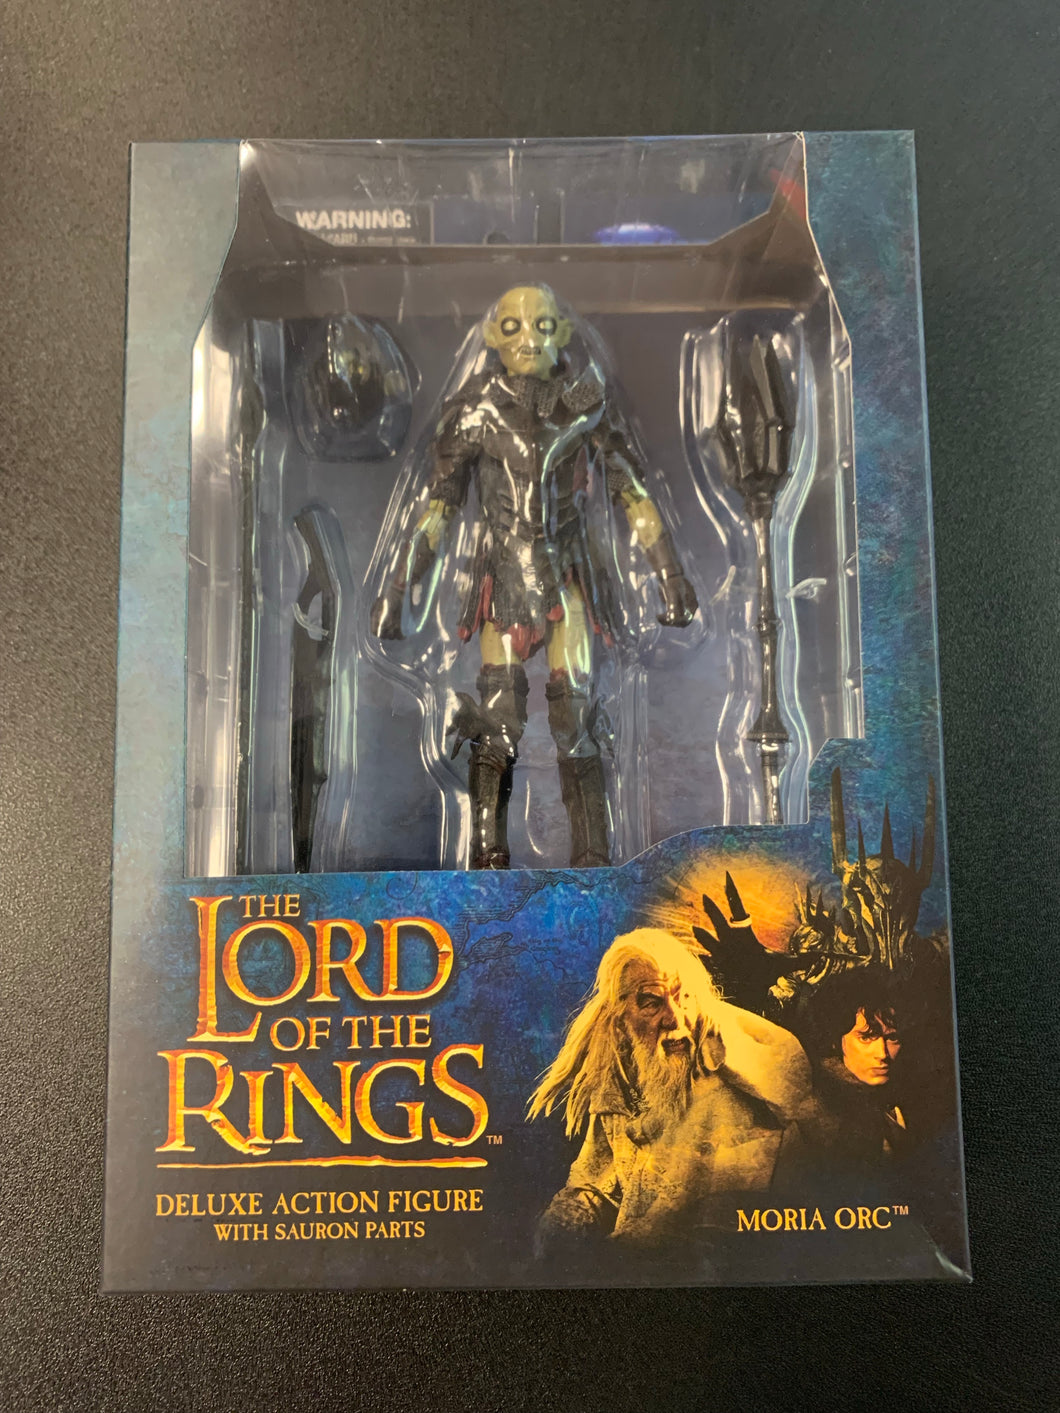 DIAMOND SELECT TOYS THE LORD OF THE RINGS DELUXE ACTION FIGURE WITH SAURON PARTS MORIA ORC